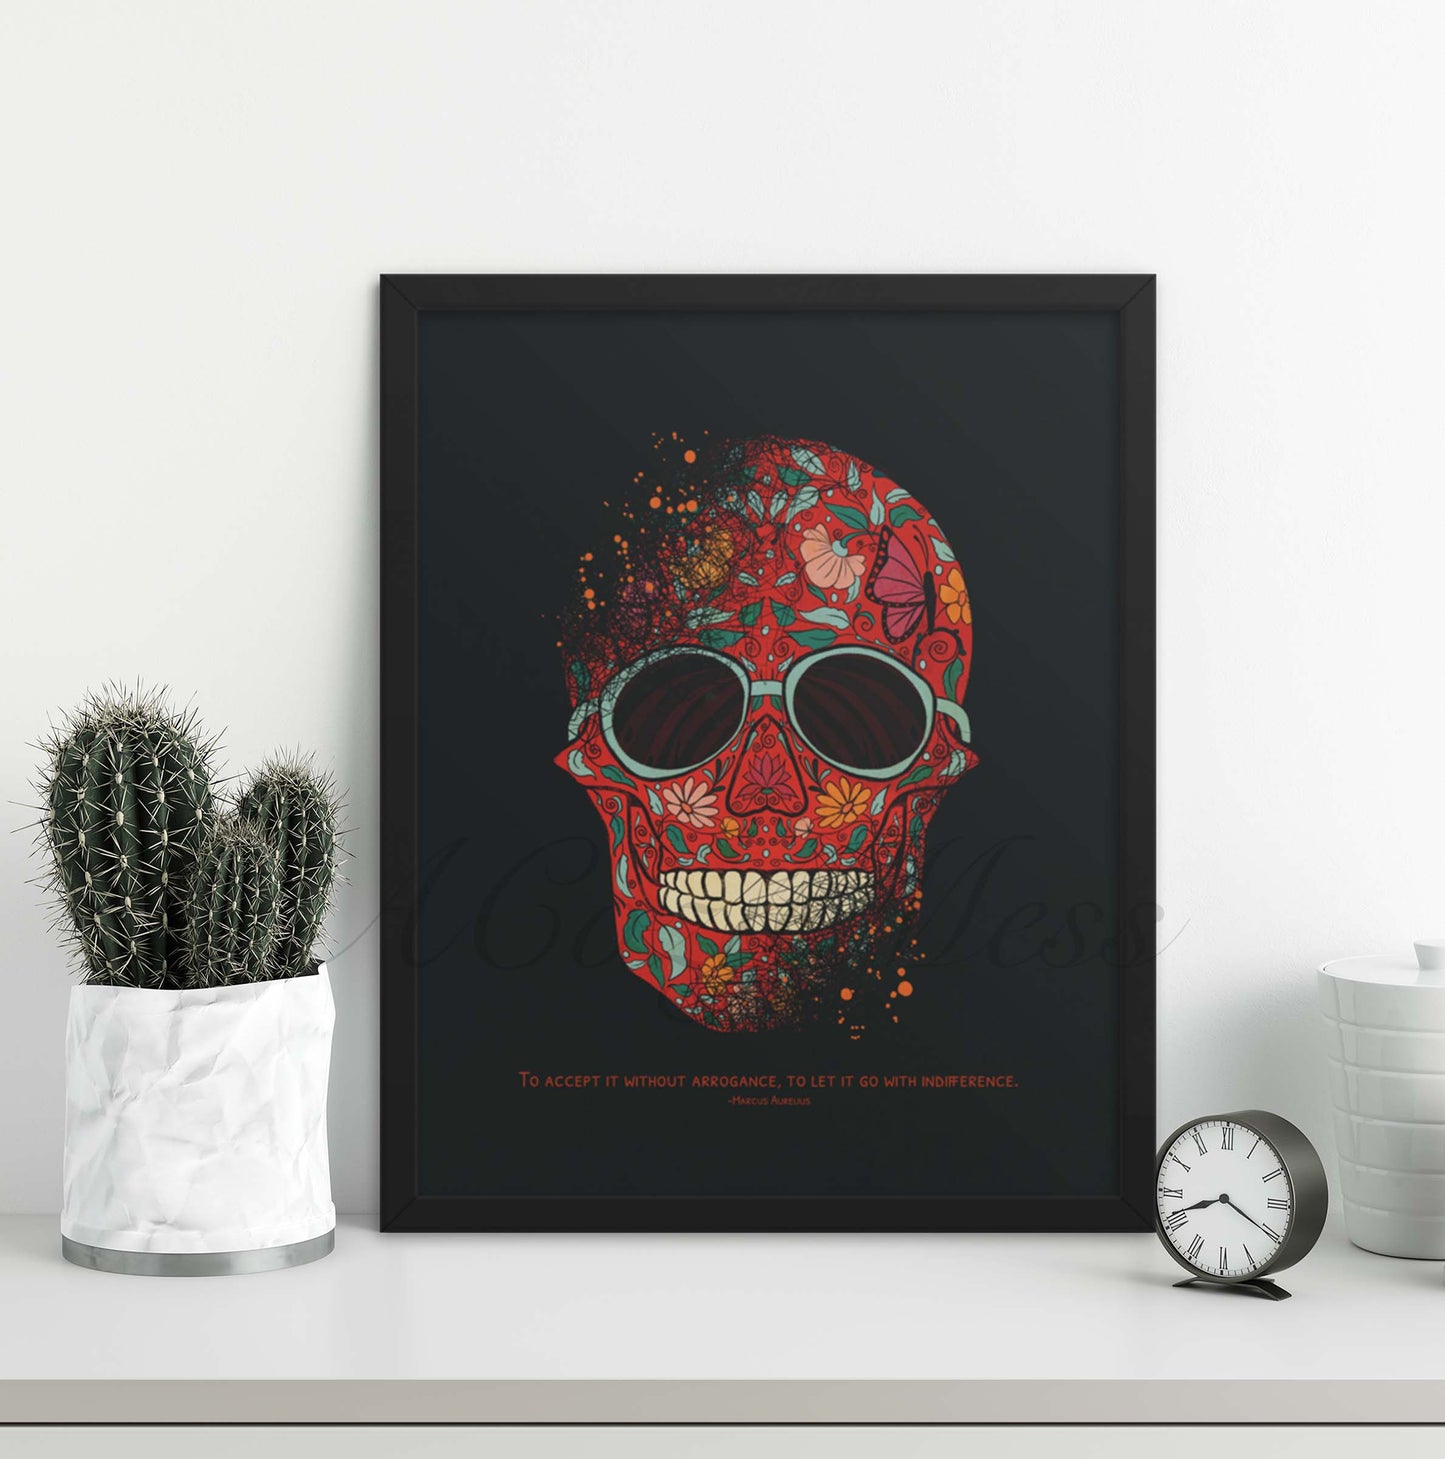  A striking art poster depicting a skull richly decorated with red and orange floral designs against a dark background, wearing round, black sunglasses. Below the skull is a quote from Marcus Aurelius in white font that reads, "To accept it without arrogance, to let it go with indifference, in black frame.